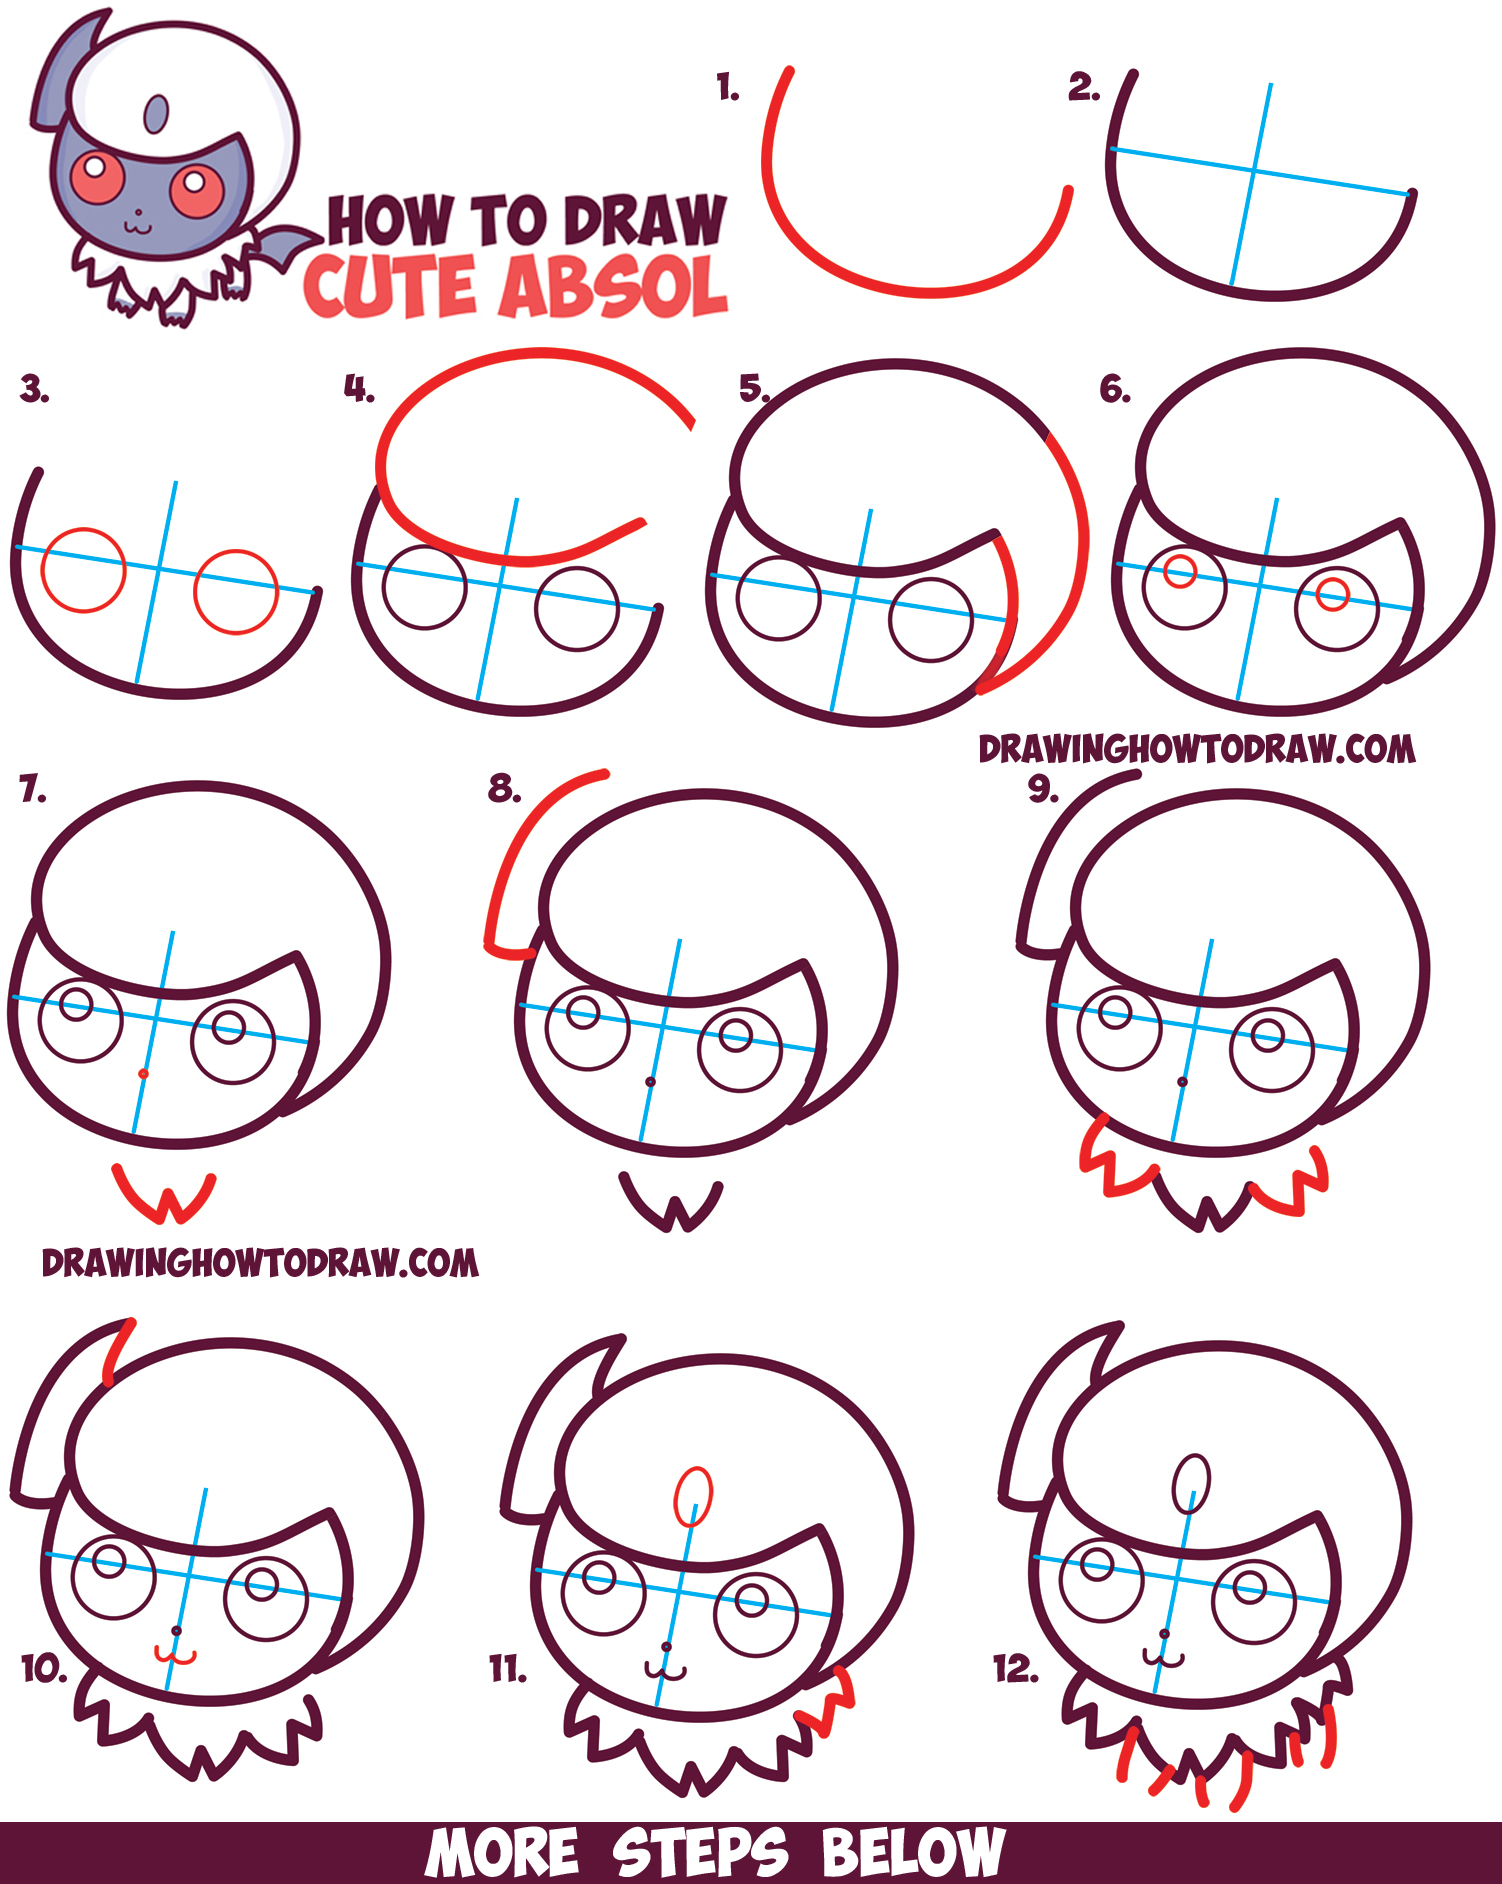 How to Draw Absol from Pokemon (Cute / Kawaii / Chibi) Easy Step by Step Drawing Tutorial for Kids